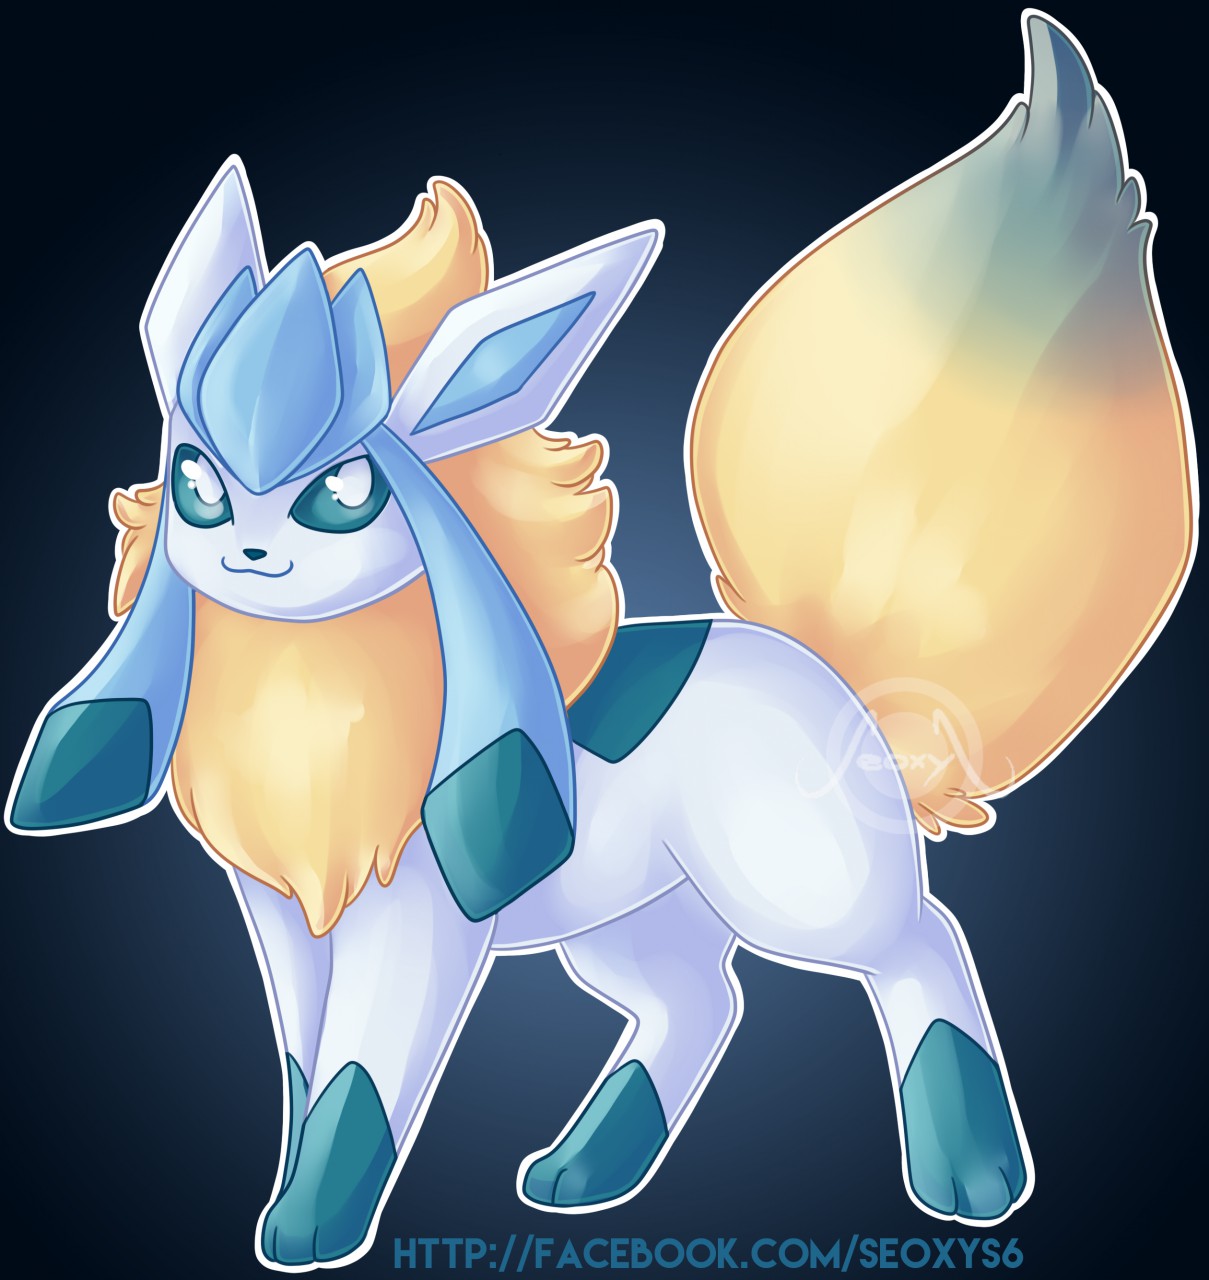 Glaceon + Flareon. 